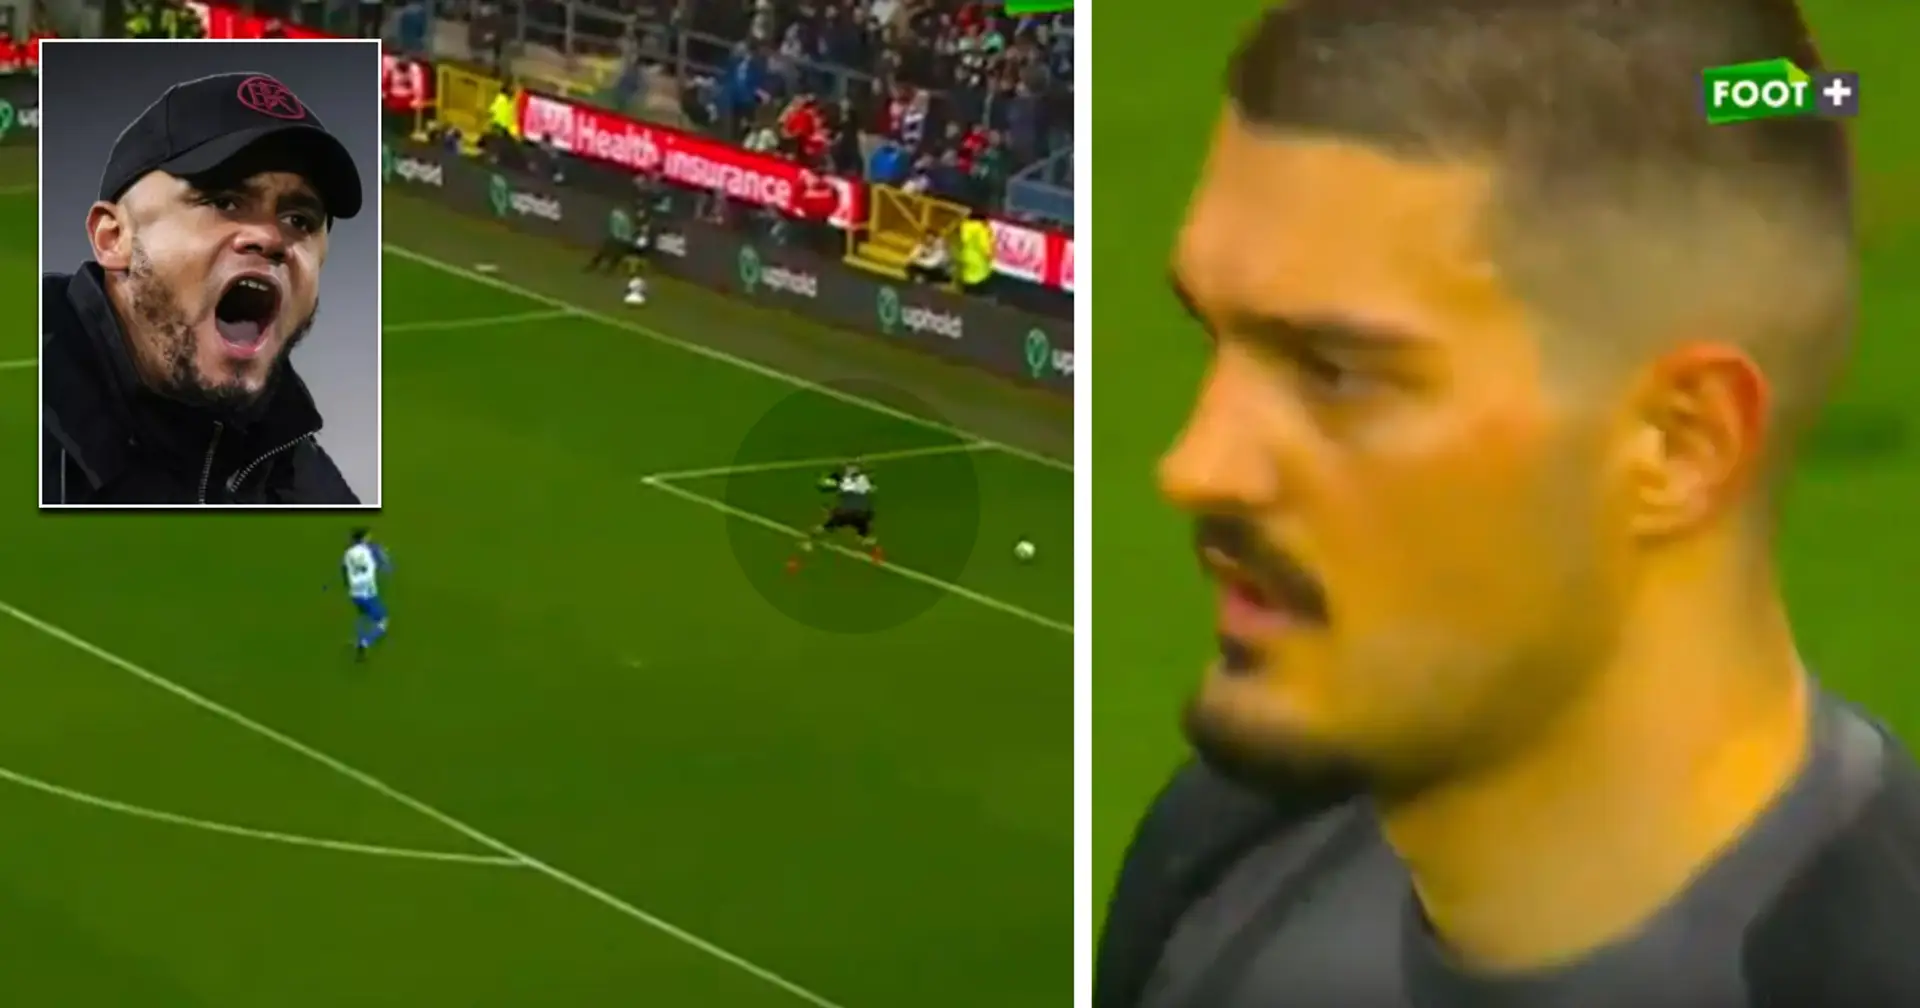 Burnley goalkeeper Arijanet Muric concedes terrible mistake in second game in a row — this may cost his team Premier League place